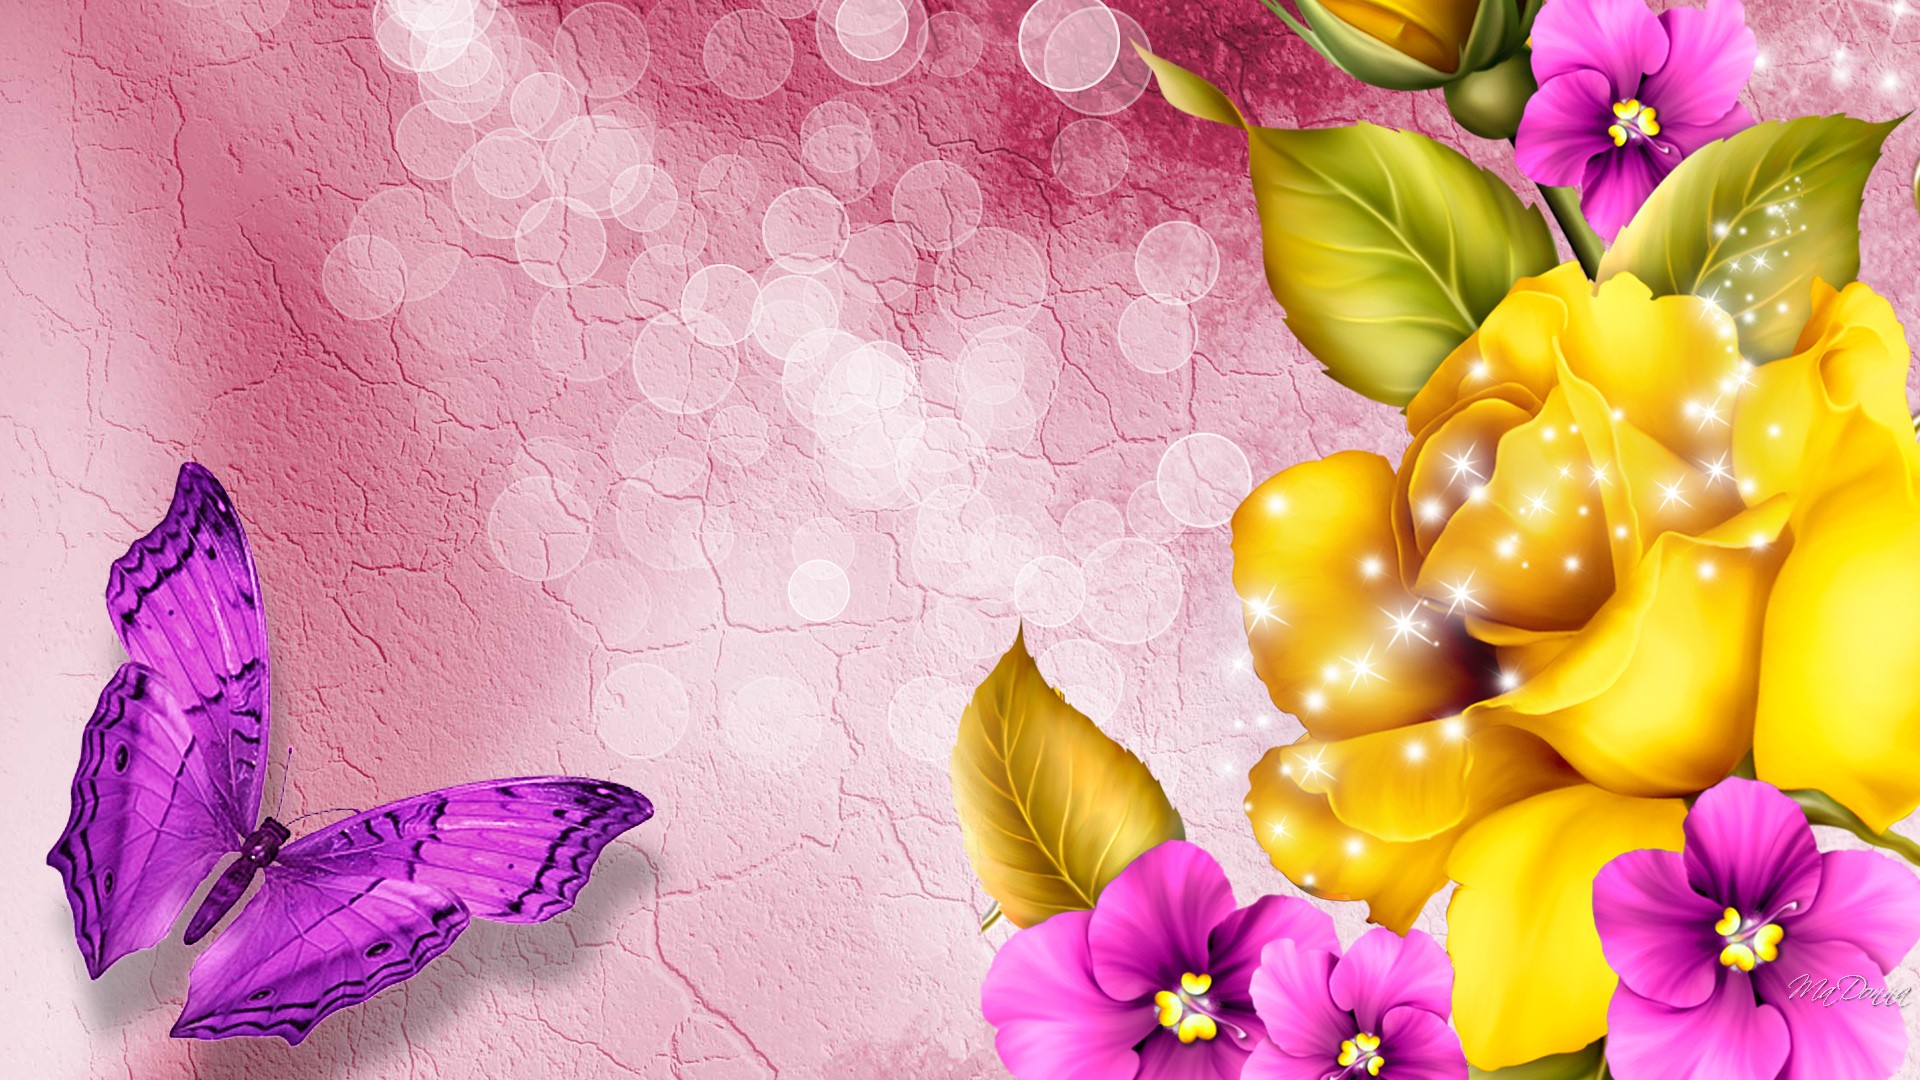 Pink Flower And Butterfly Wallpaper Beautiful Colorful Flowers